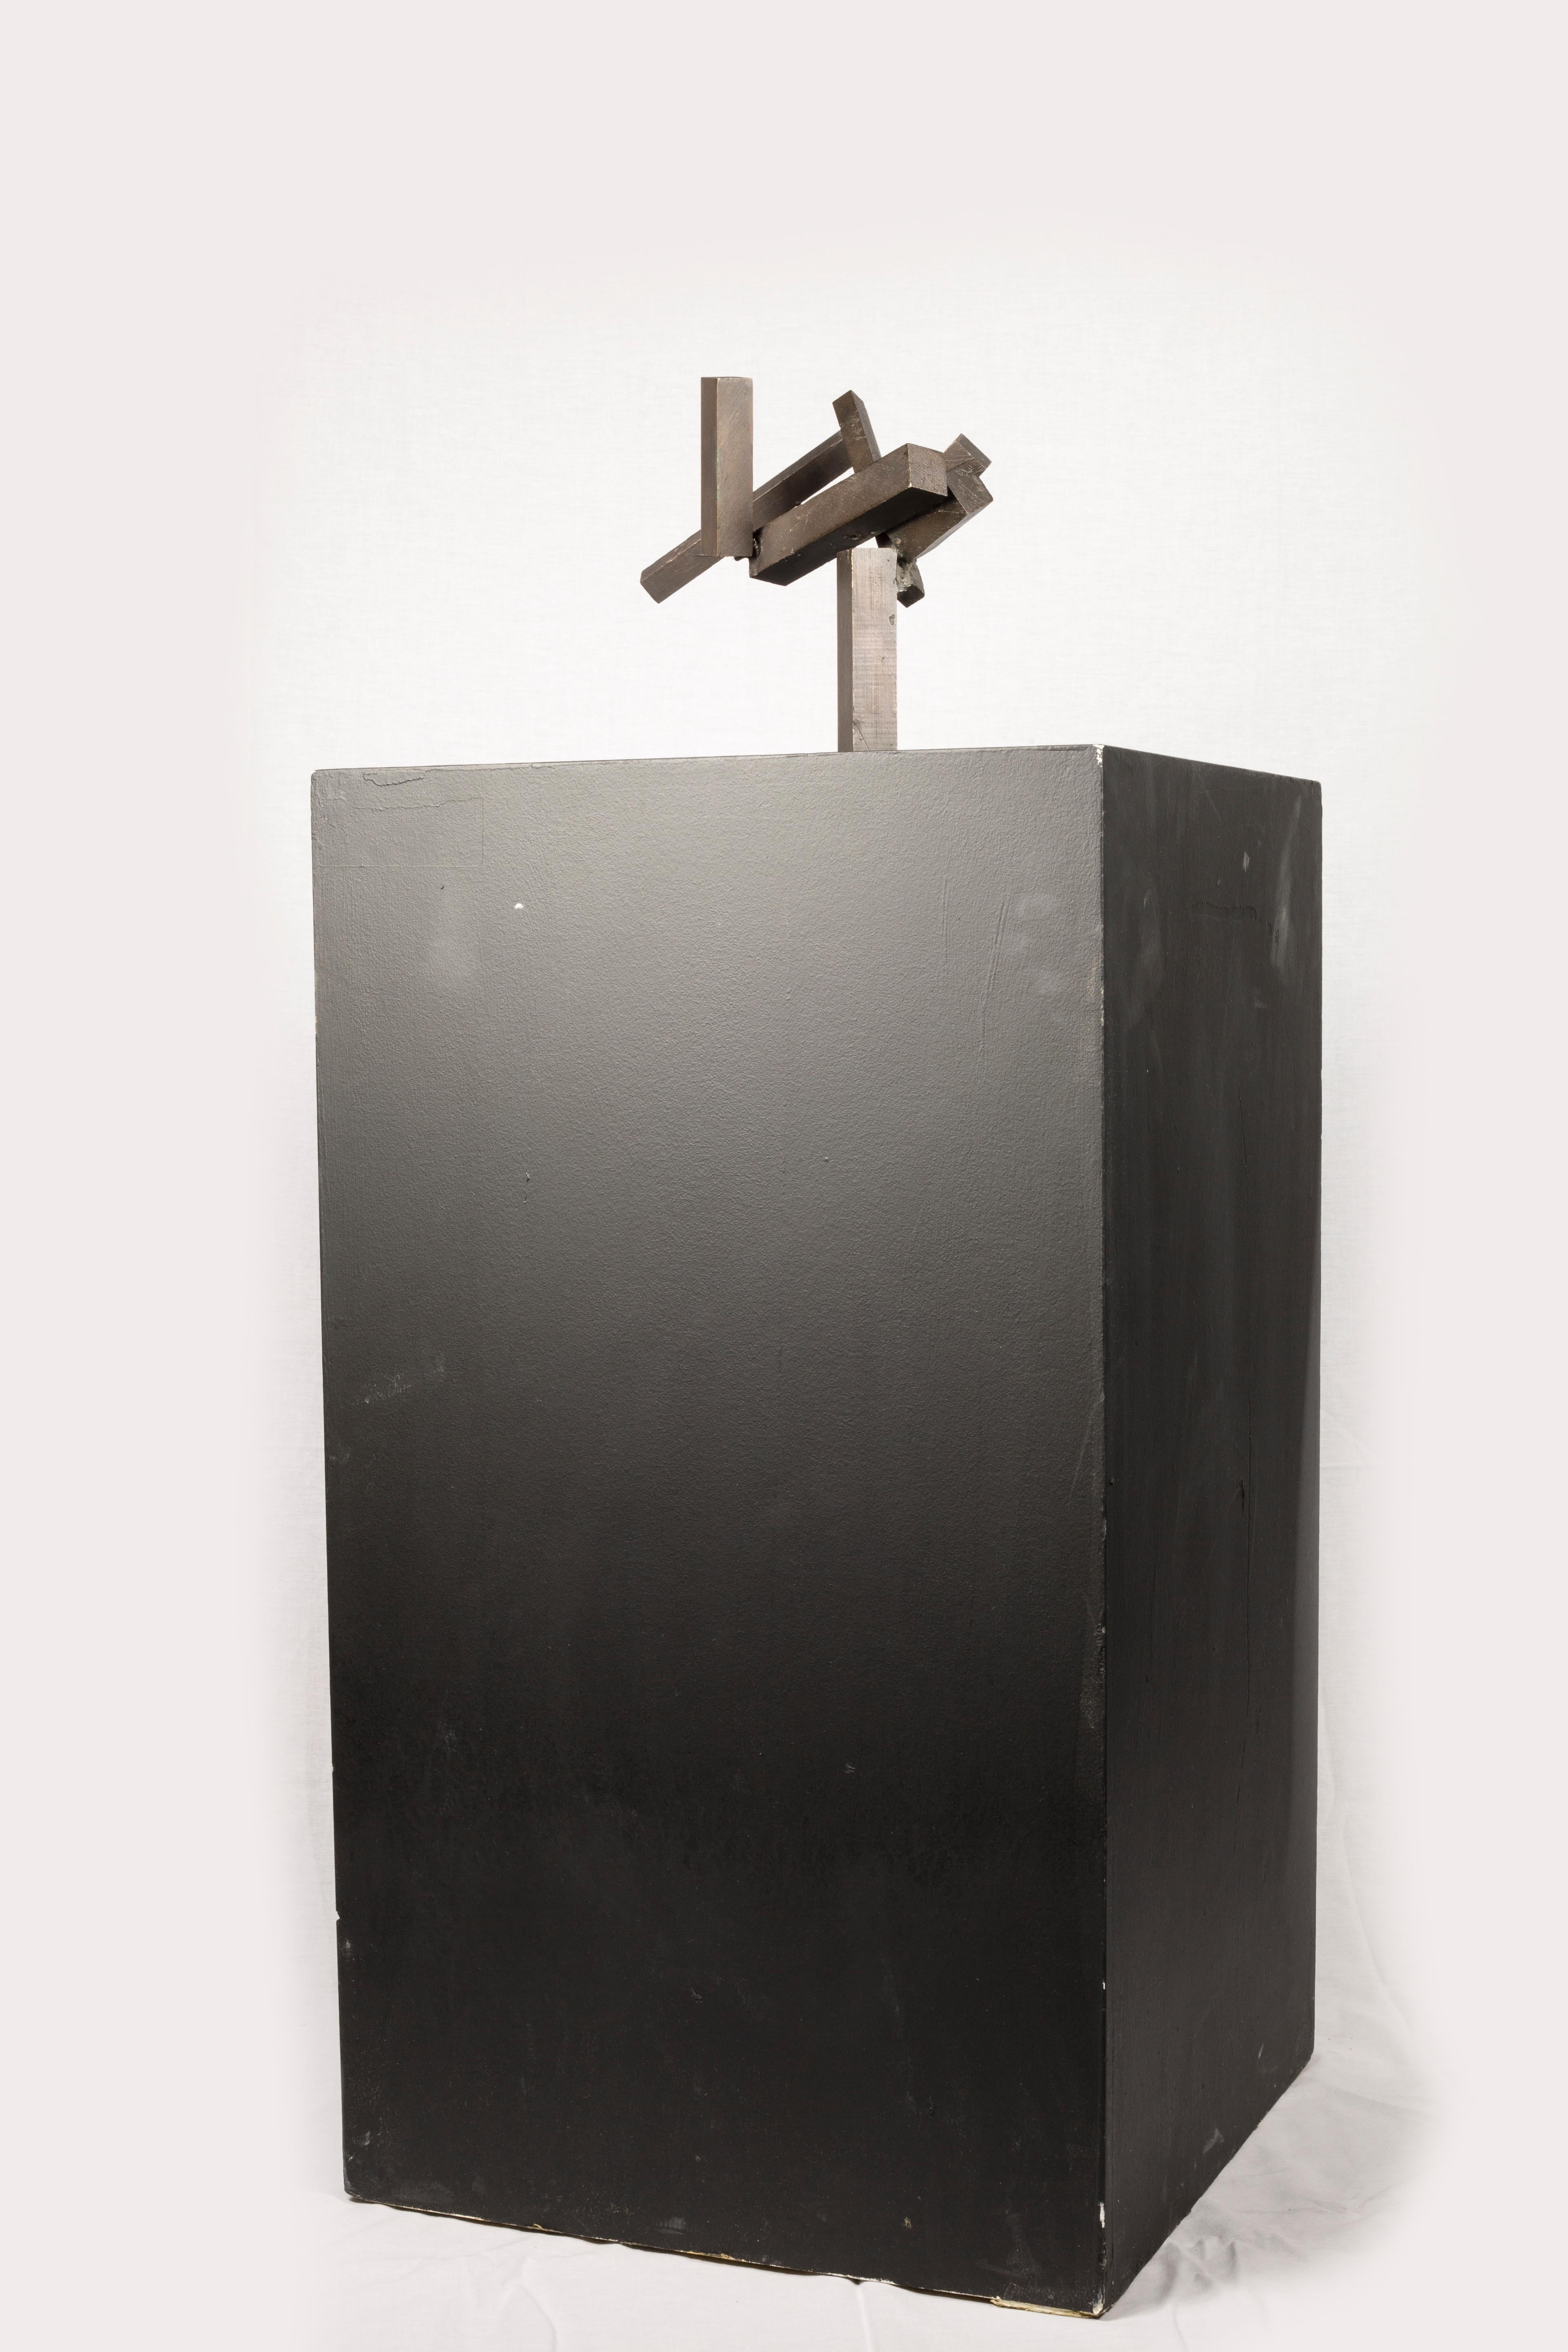 Joel Shapiro Untitled  (2001 - 2005) Bronze. The provenance is the Pace Gallery.